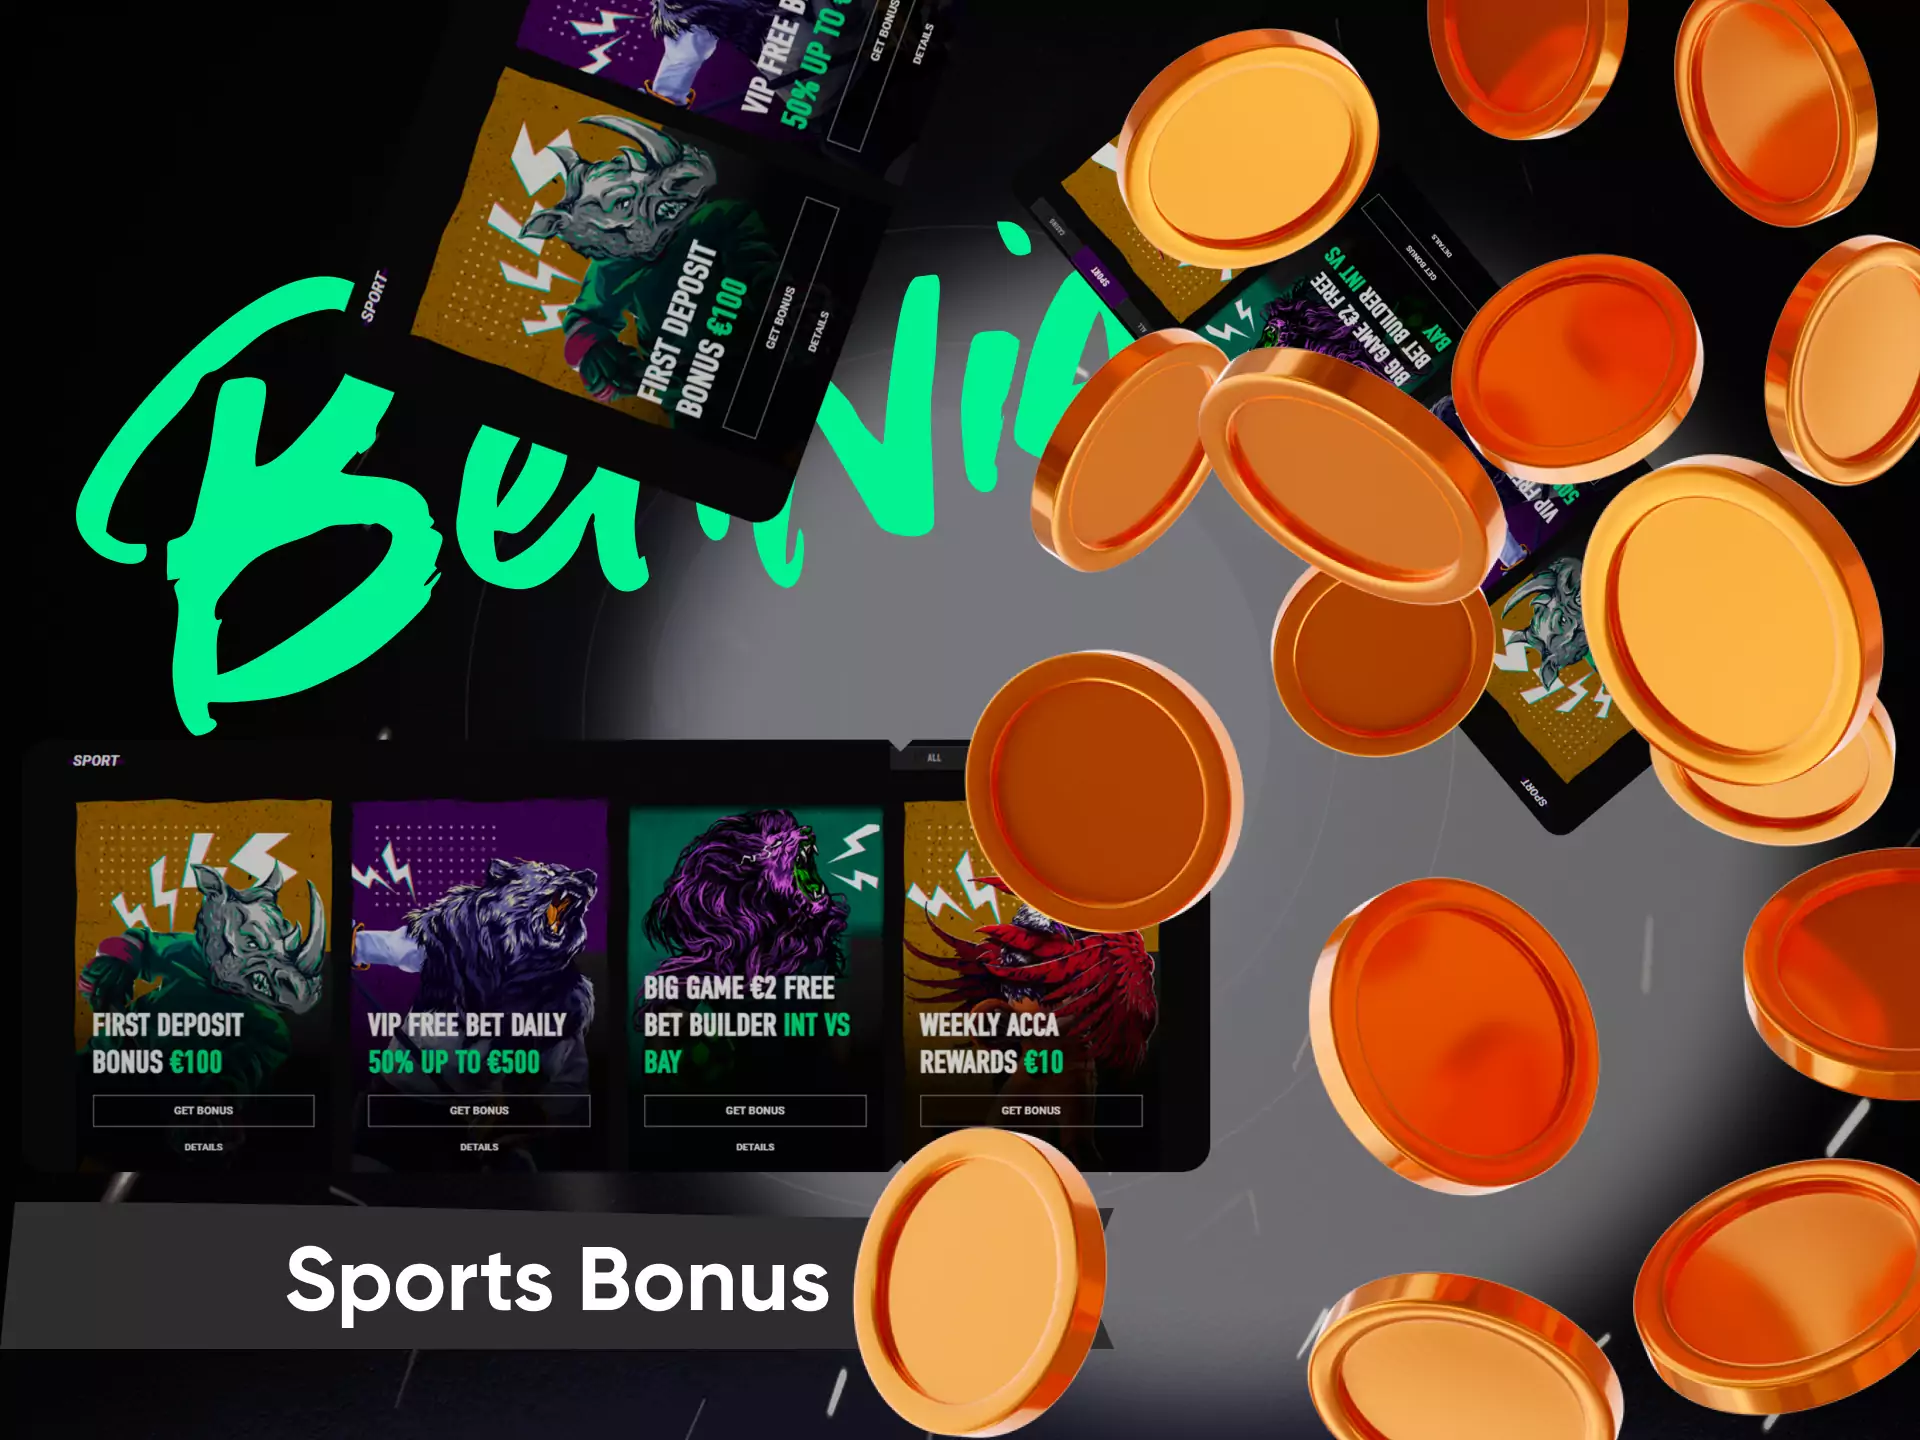 Players of Betinia get a bonus on sports betting from the bookmaker.